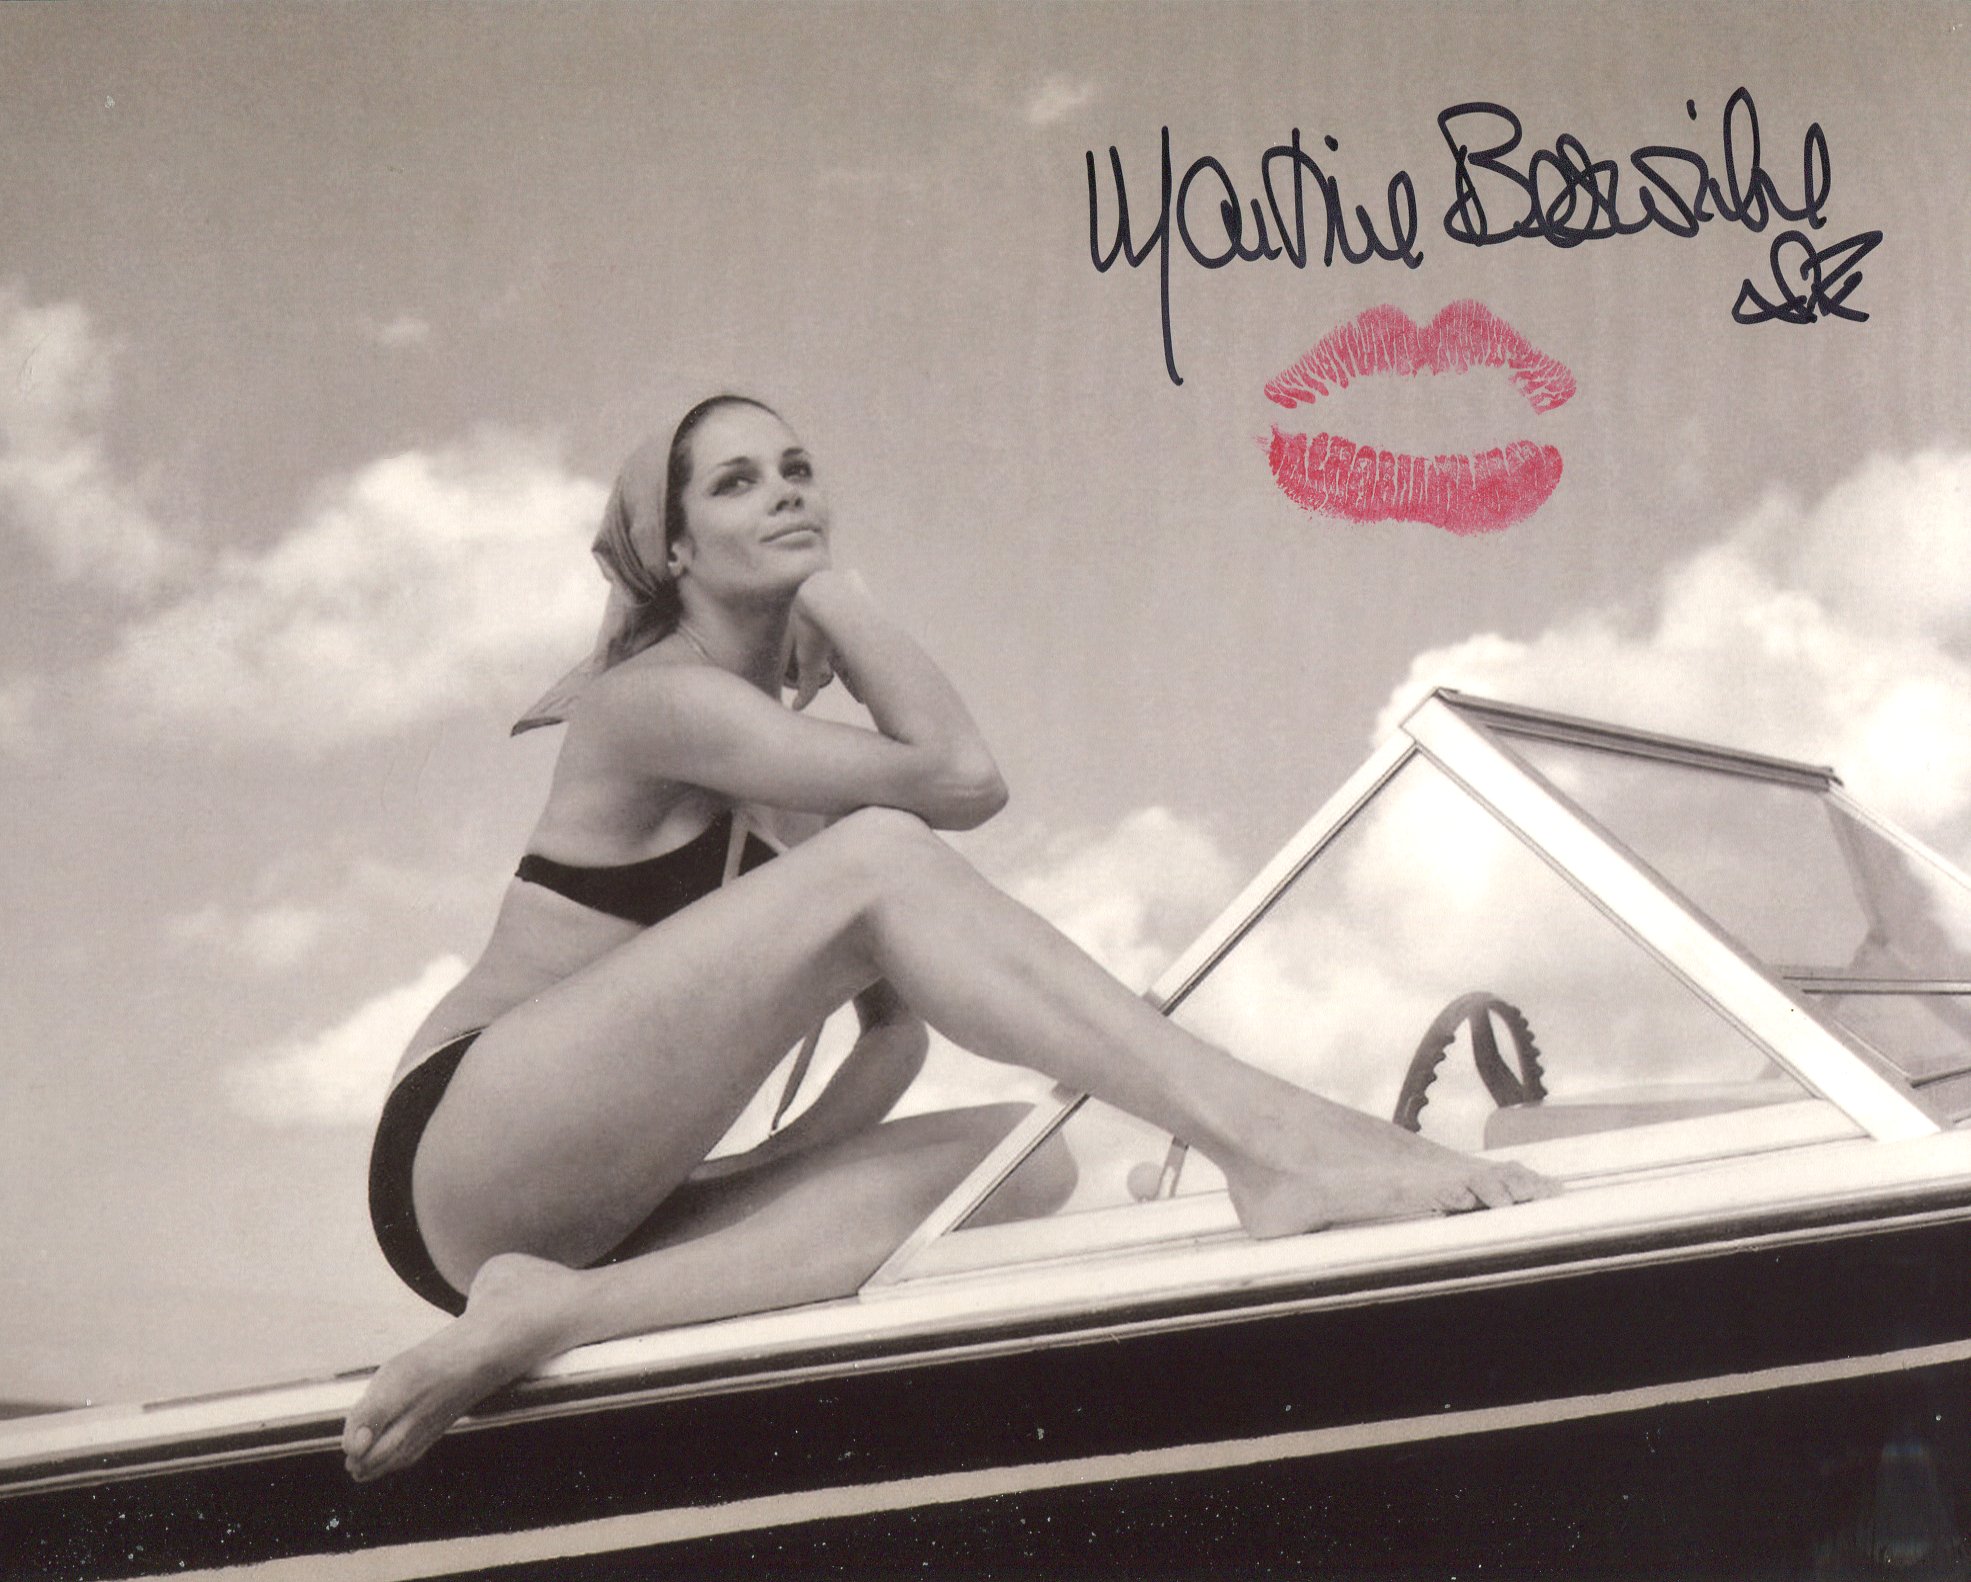 007 Bond girl Martine Beswick signed and physically kissed Thunderball photo to leave a lipstick